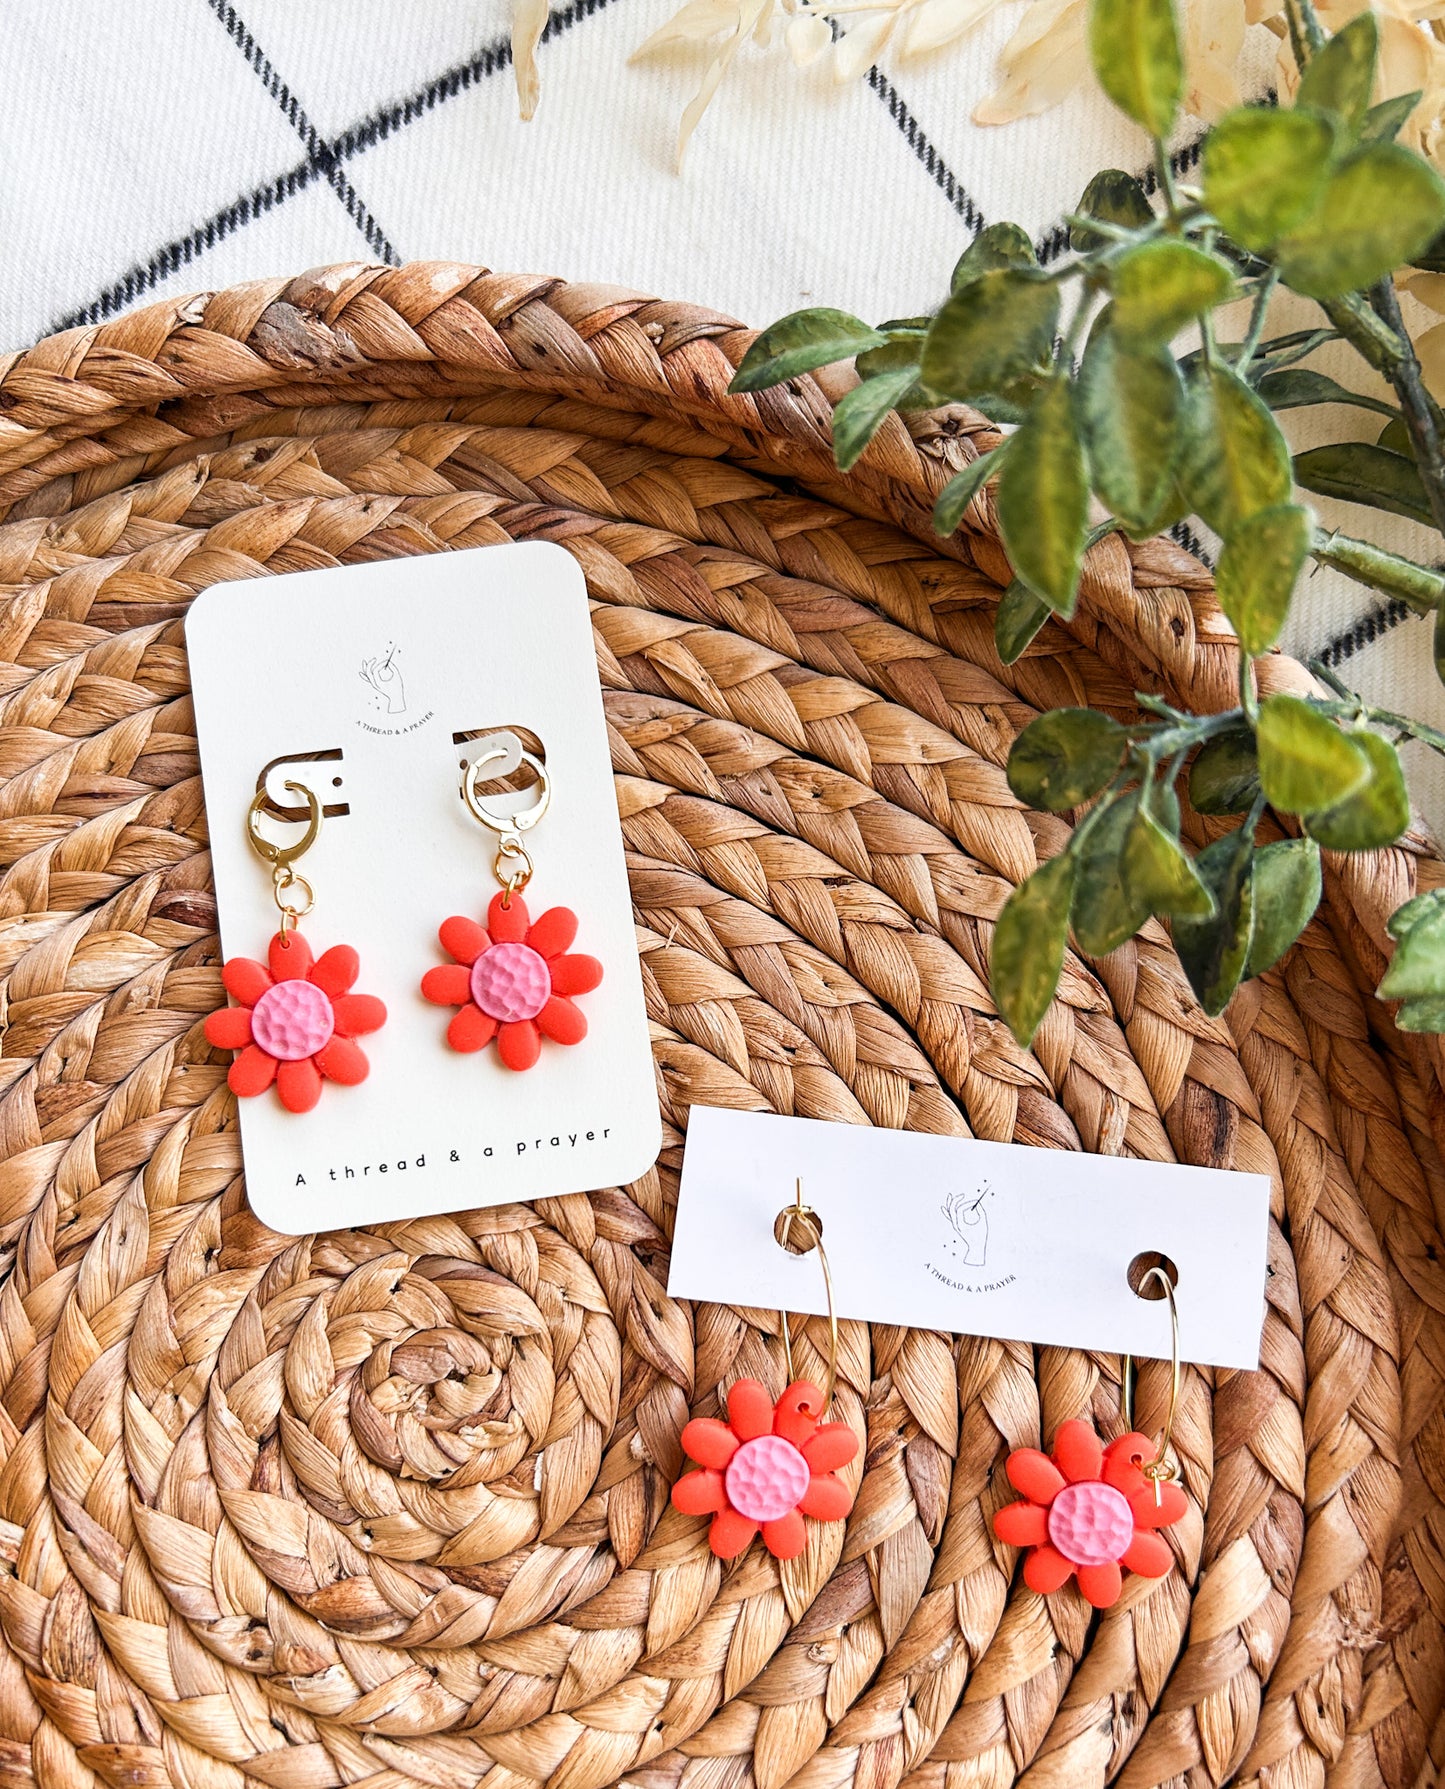 Coral Floral Fun Dangle Earrings | Spring Fashion | Spring Color Earrings | Floral Earrings | Lightweight | Springy